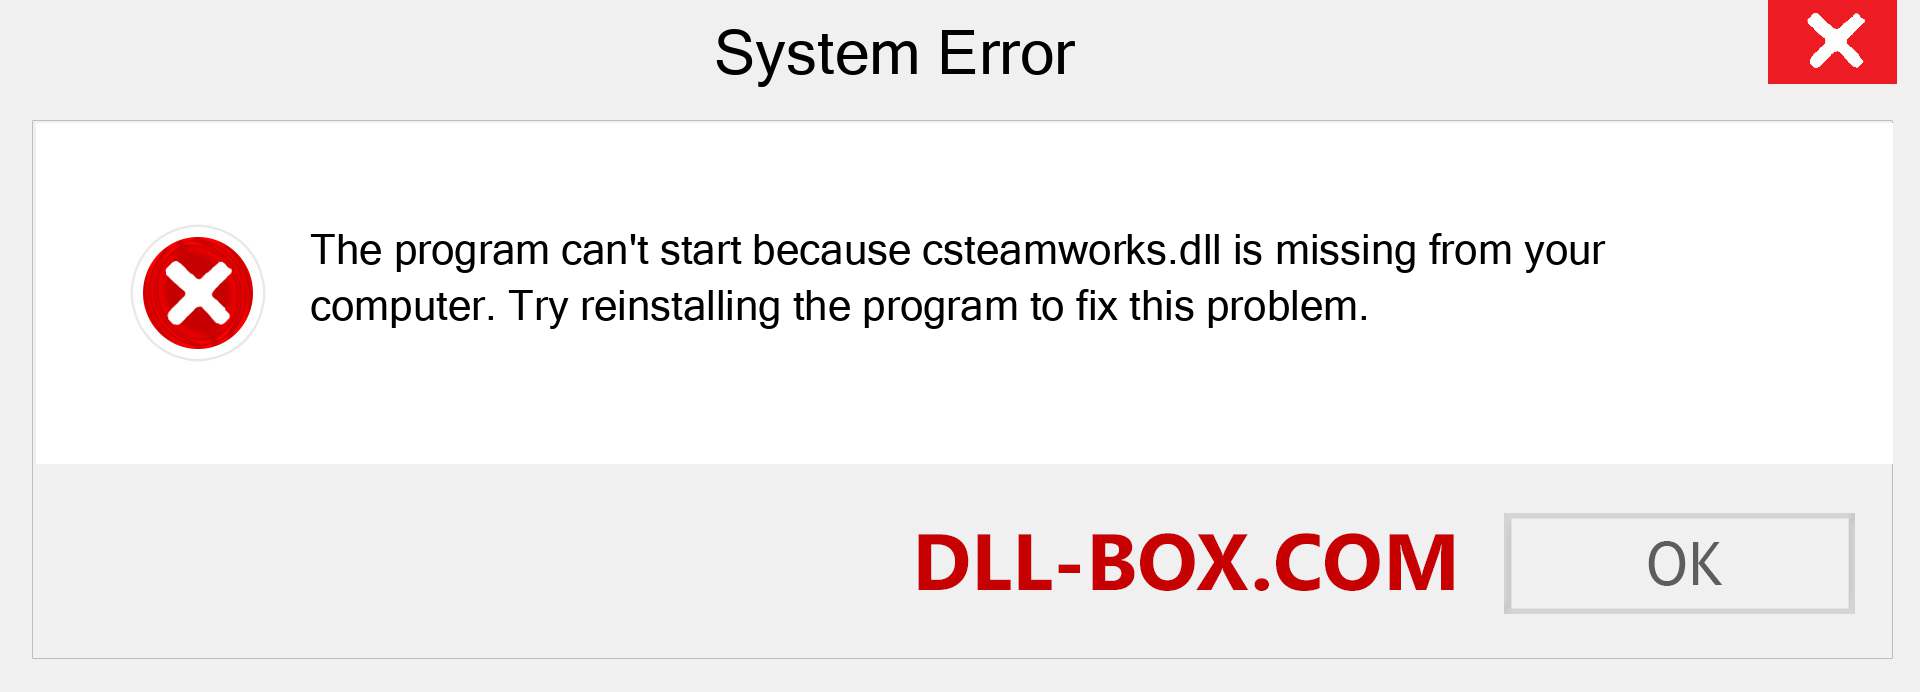  csteamworks.dll file is missing?. Download for Windows 7, 8, 10 - Fix  csteamworks dll Missing Error on Windows, photos, images